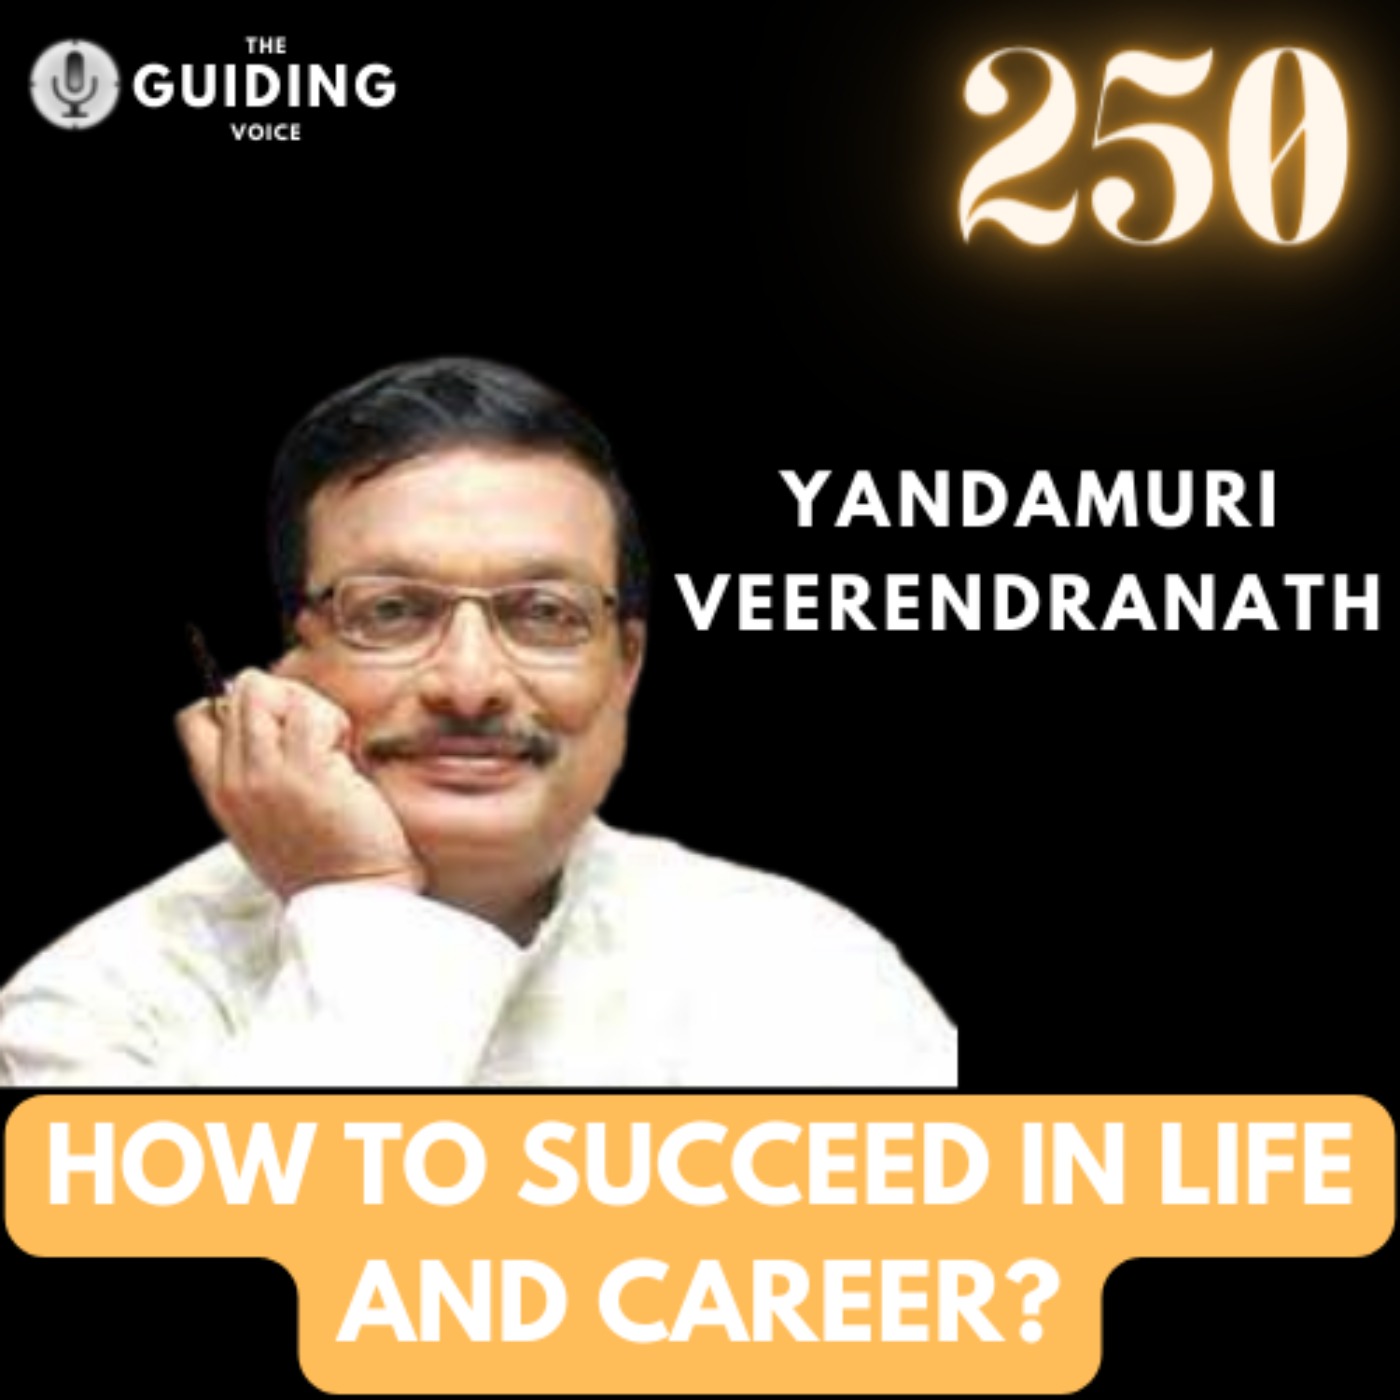 HOW TO SUCCEED IN LIFE AND YOUR CAREER? | YANDAMURI VEERENDRANATH | #TGV250